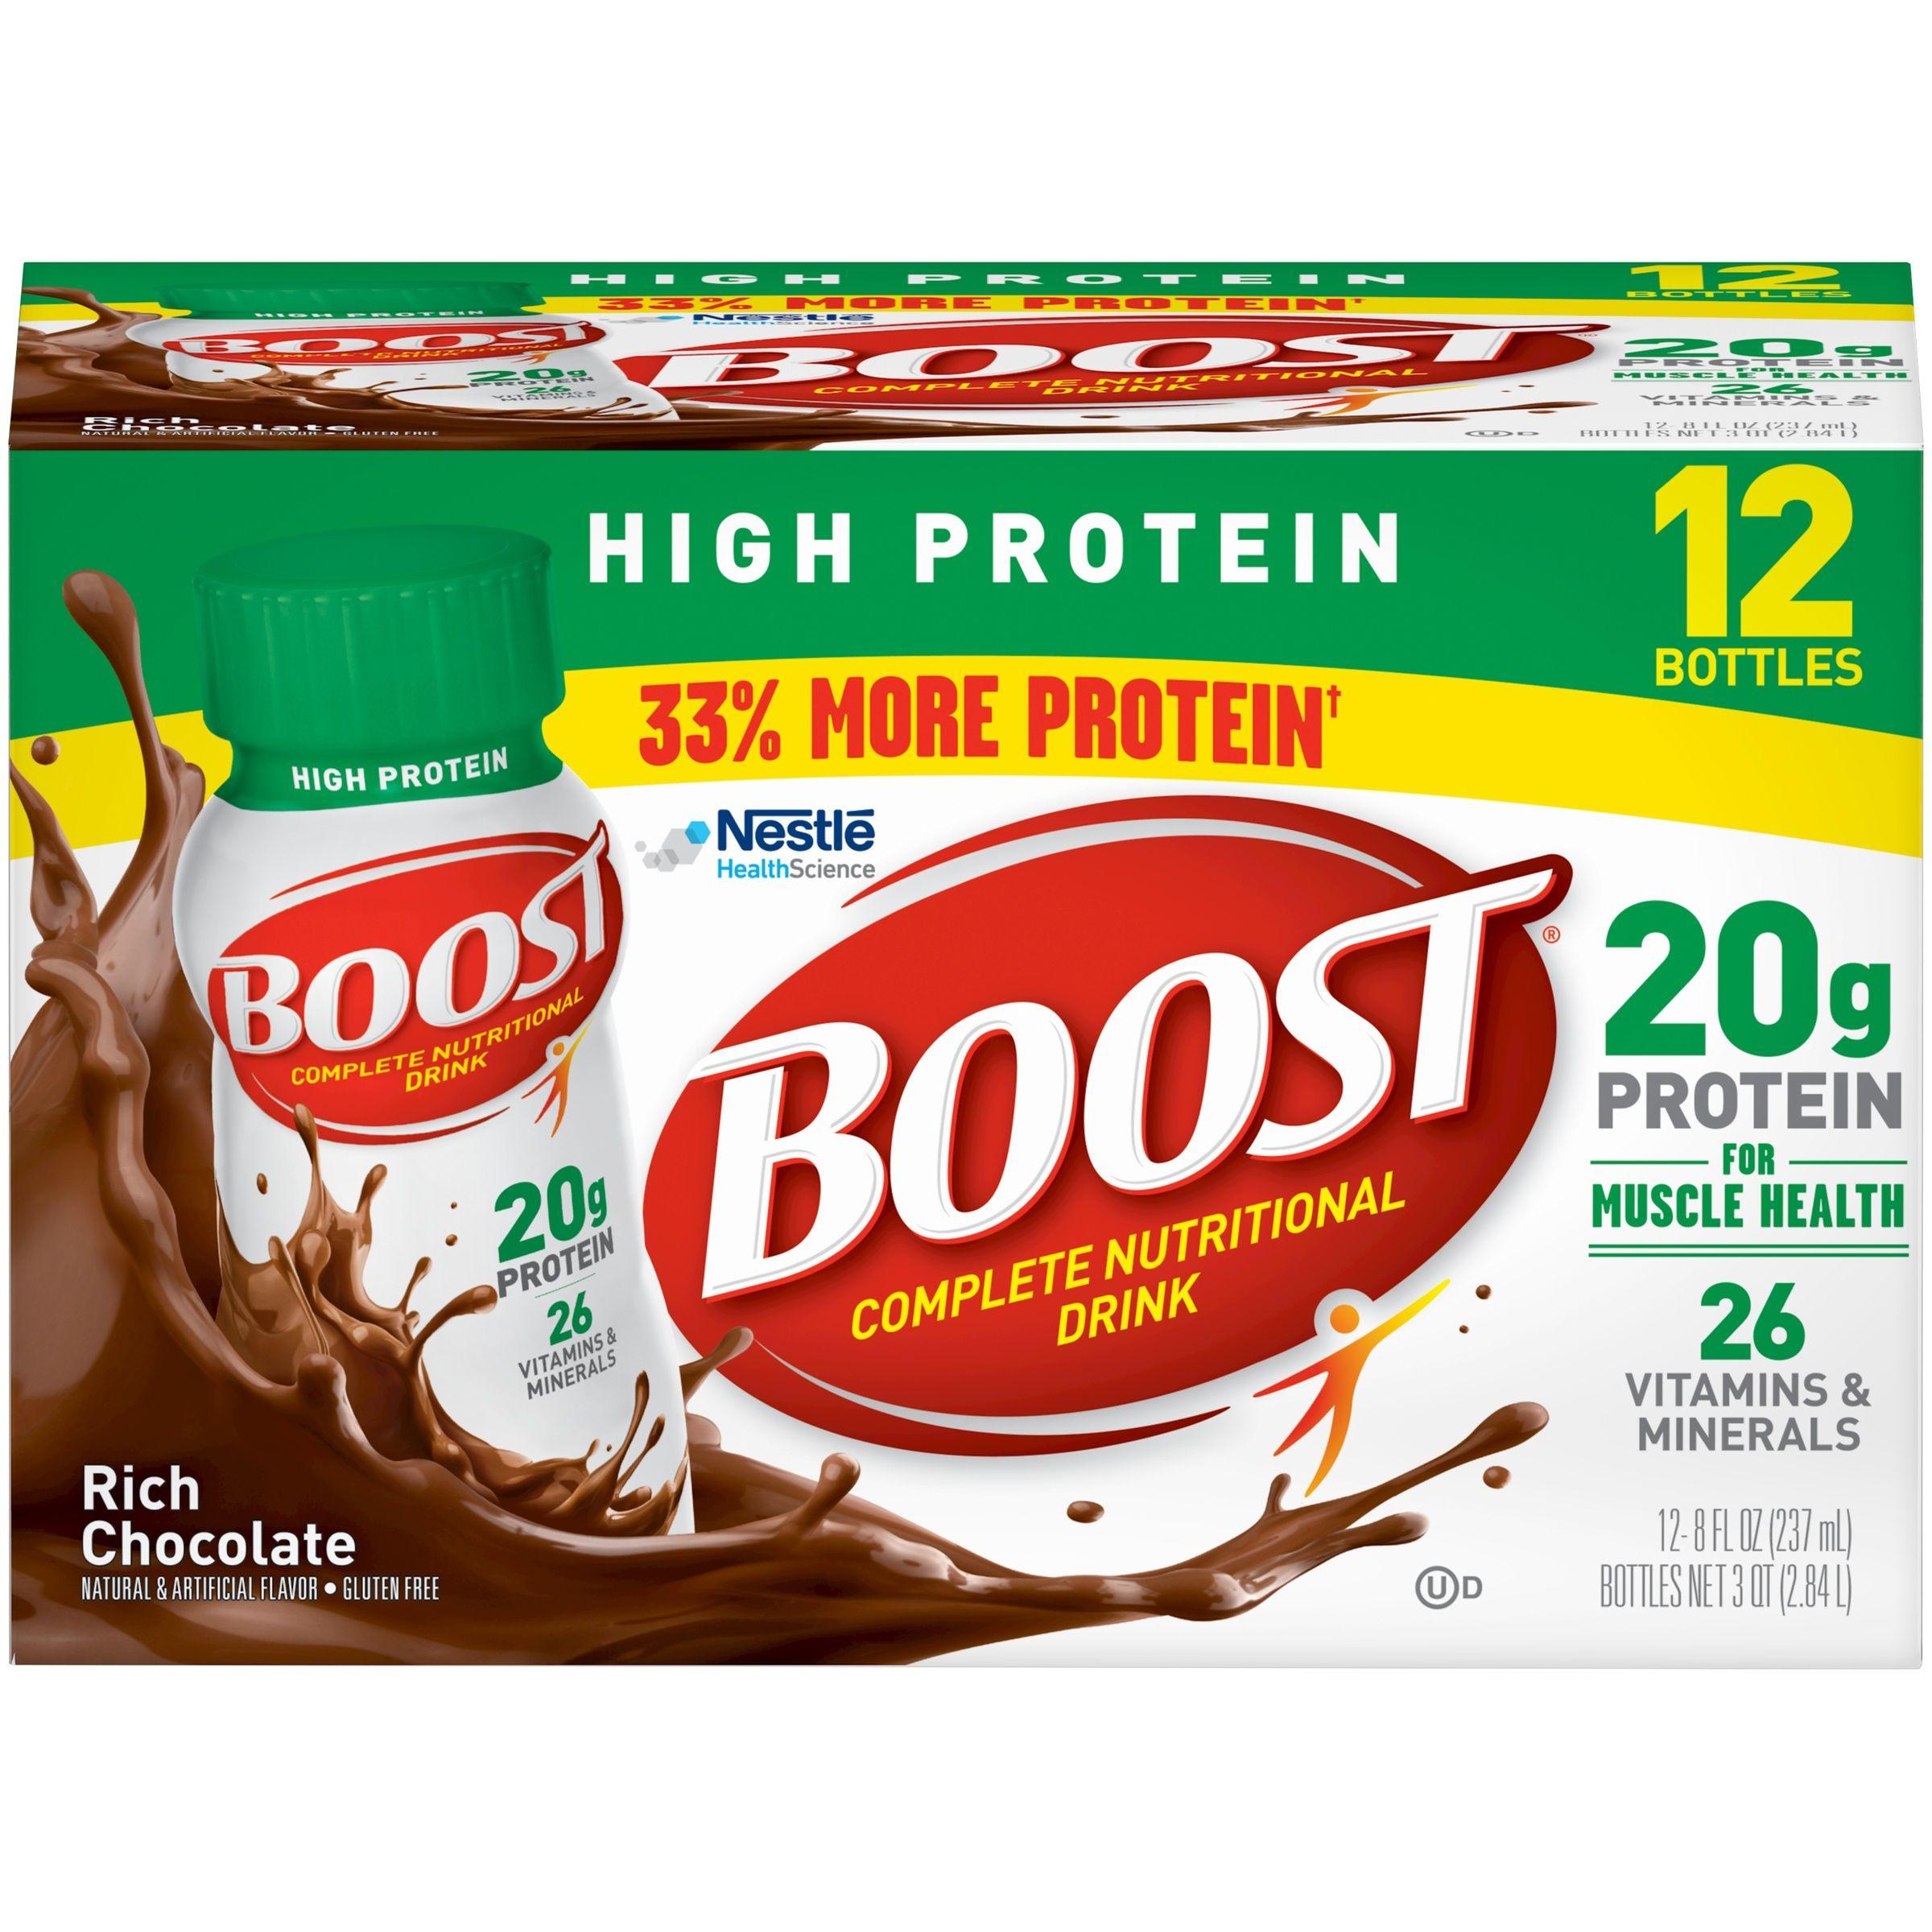 Boost Drink Logo - Boost High Protein Complete Nutritional Drink, Rich Chocolate , 8 Fl ...